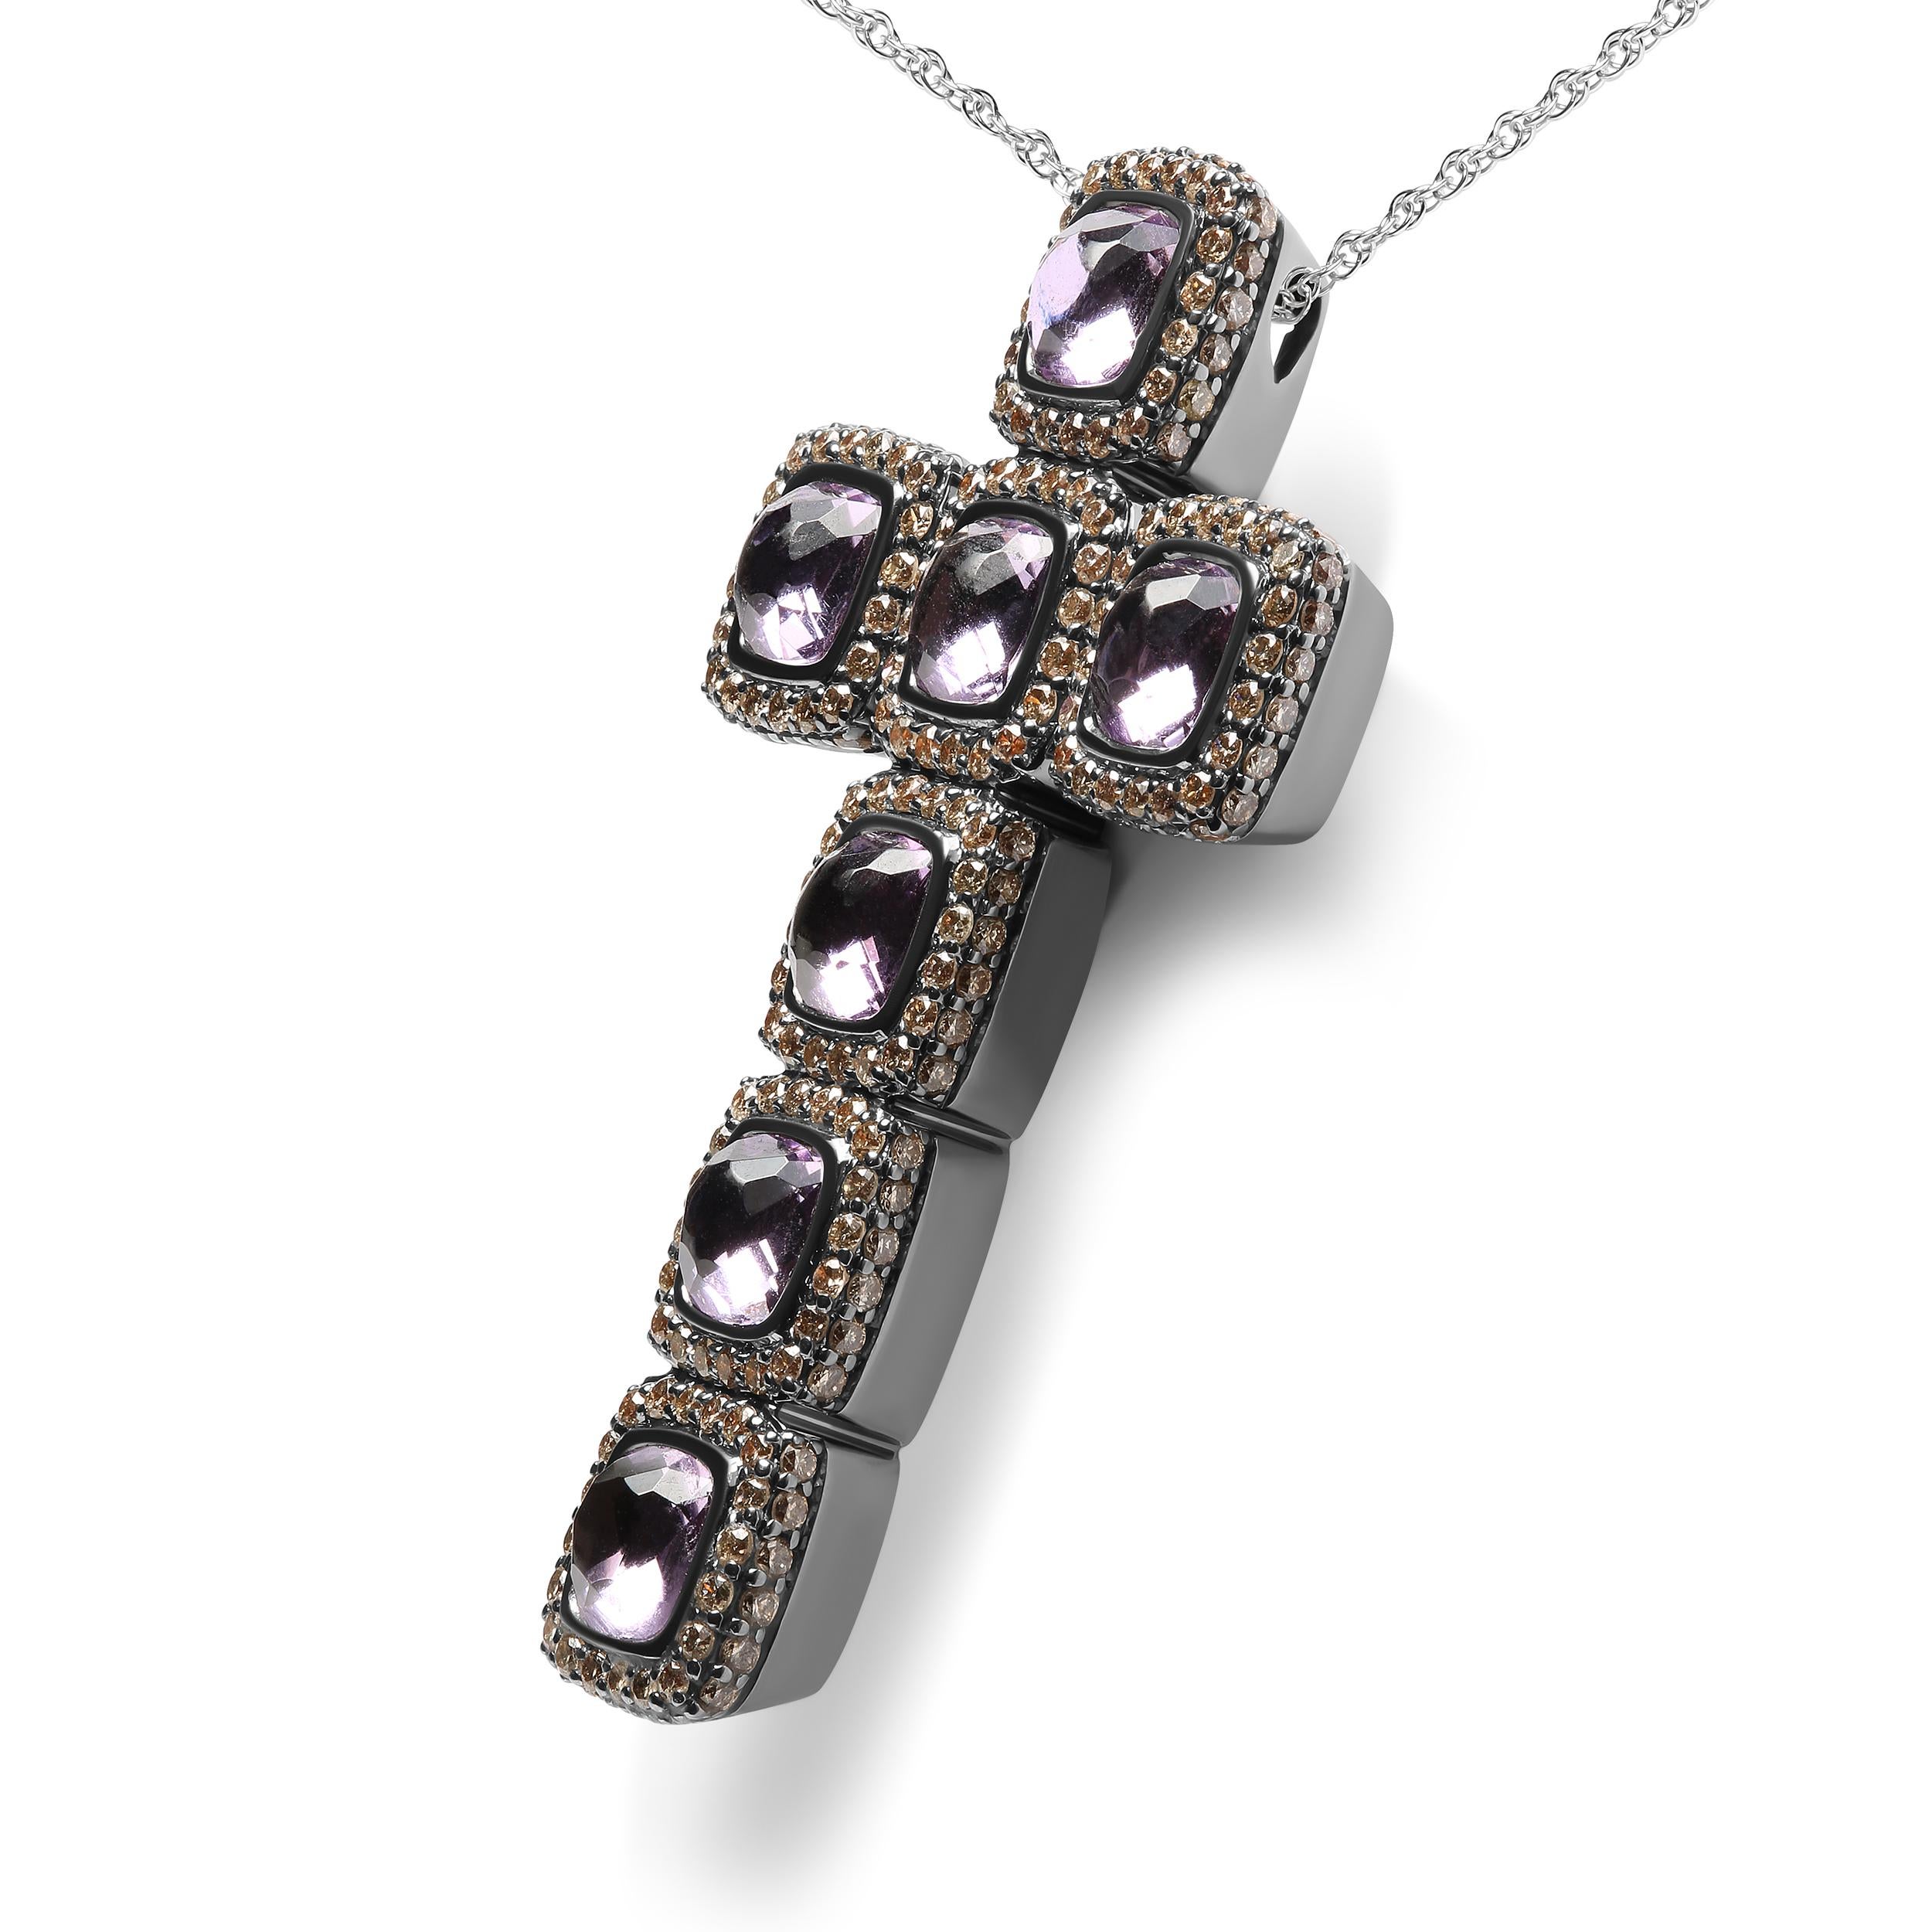 Contemporary Black Rhodium Over 18K Rose Gold 1.5ct Brown Diamond & Amethyst Pendant Necklace For Sale